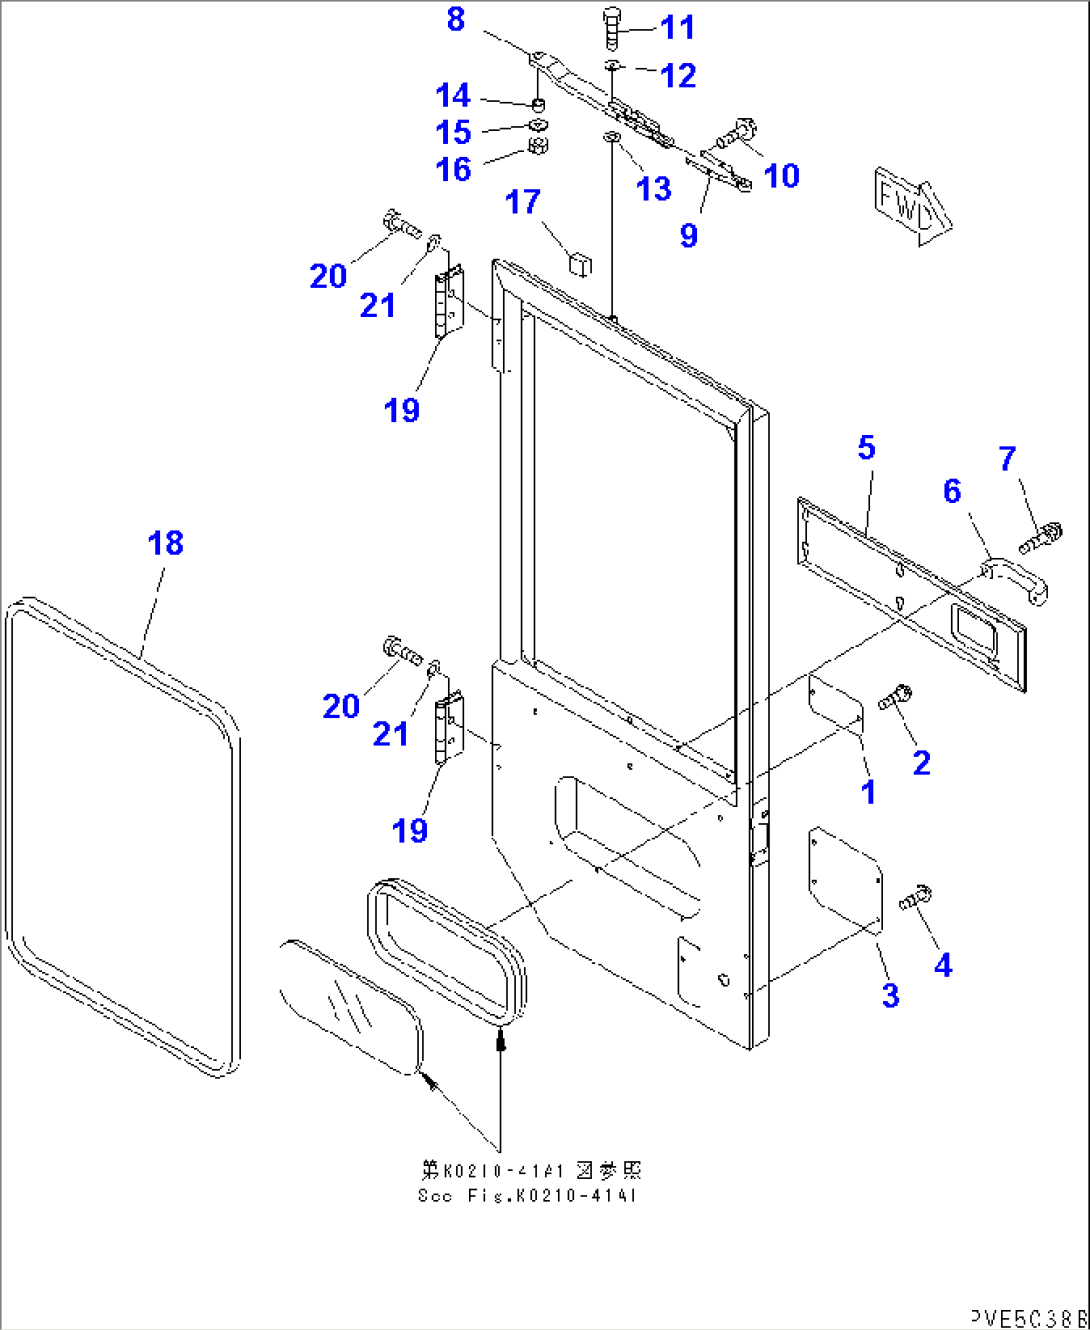 2-PERSONS CAB (DOOR RELATED PARTS R.H.)(#53001-55000)